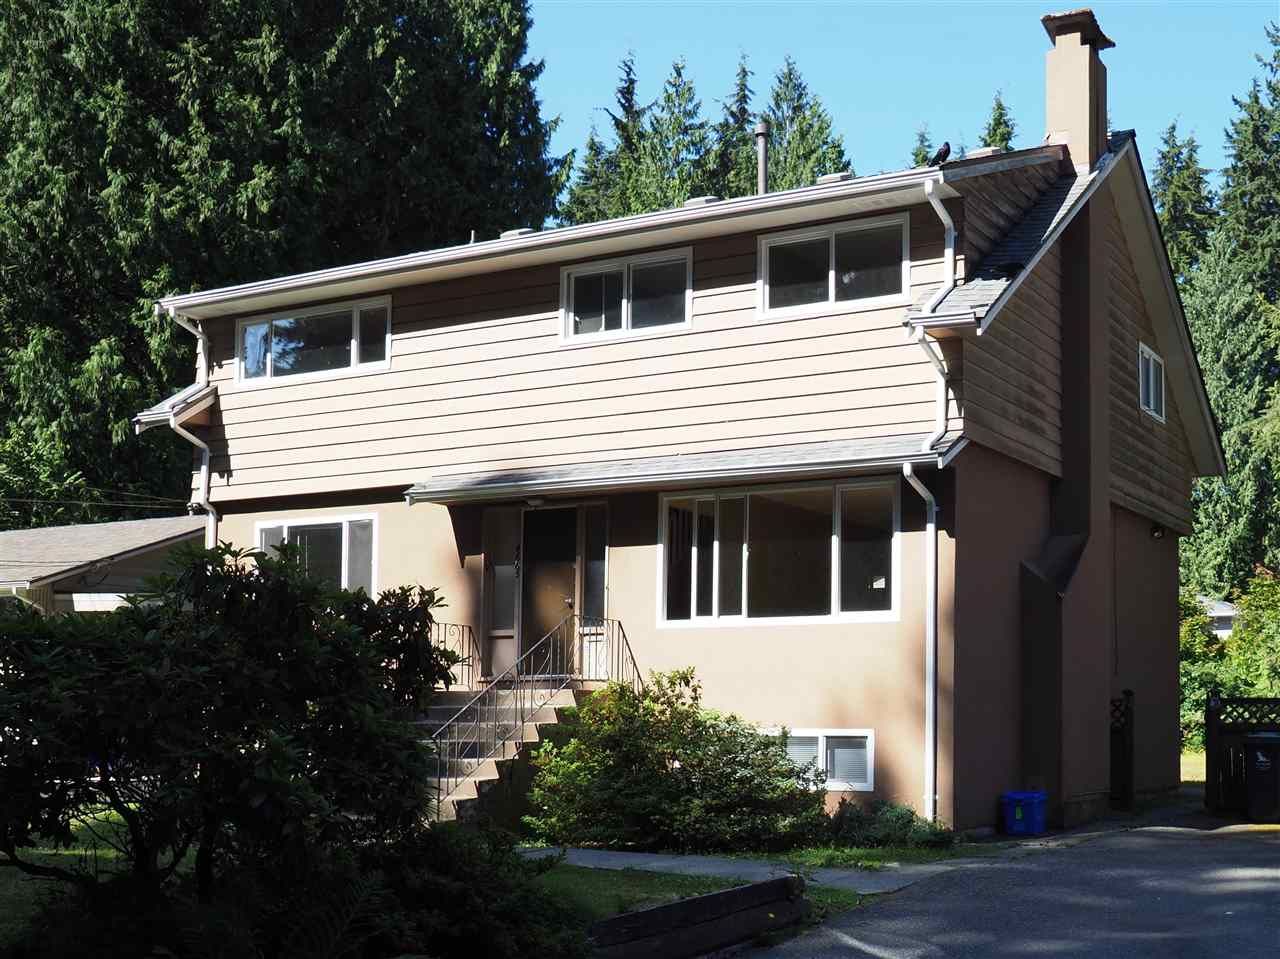 Main Photo: 4665 UNDERWOOD Avenue in North Vancouver: Lynn Valley House for sale : MLS®# R2193504